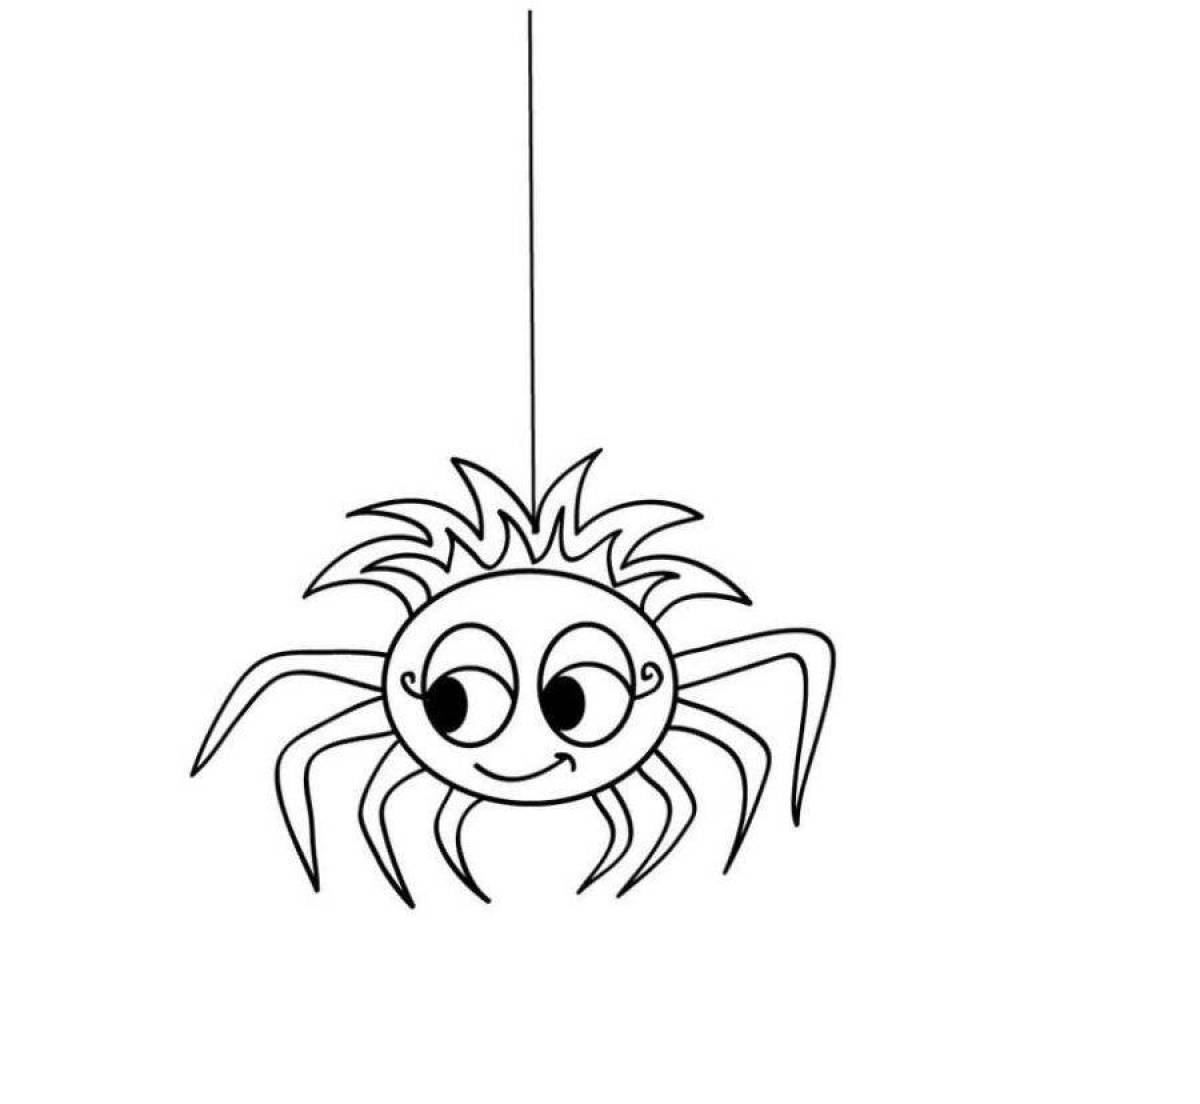 Cute spider coloring book for kids